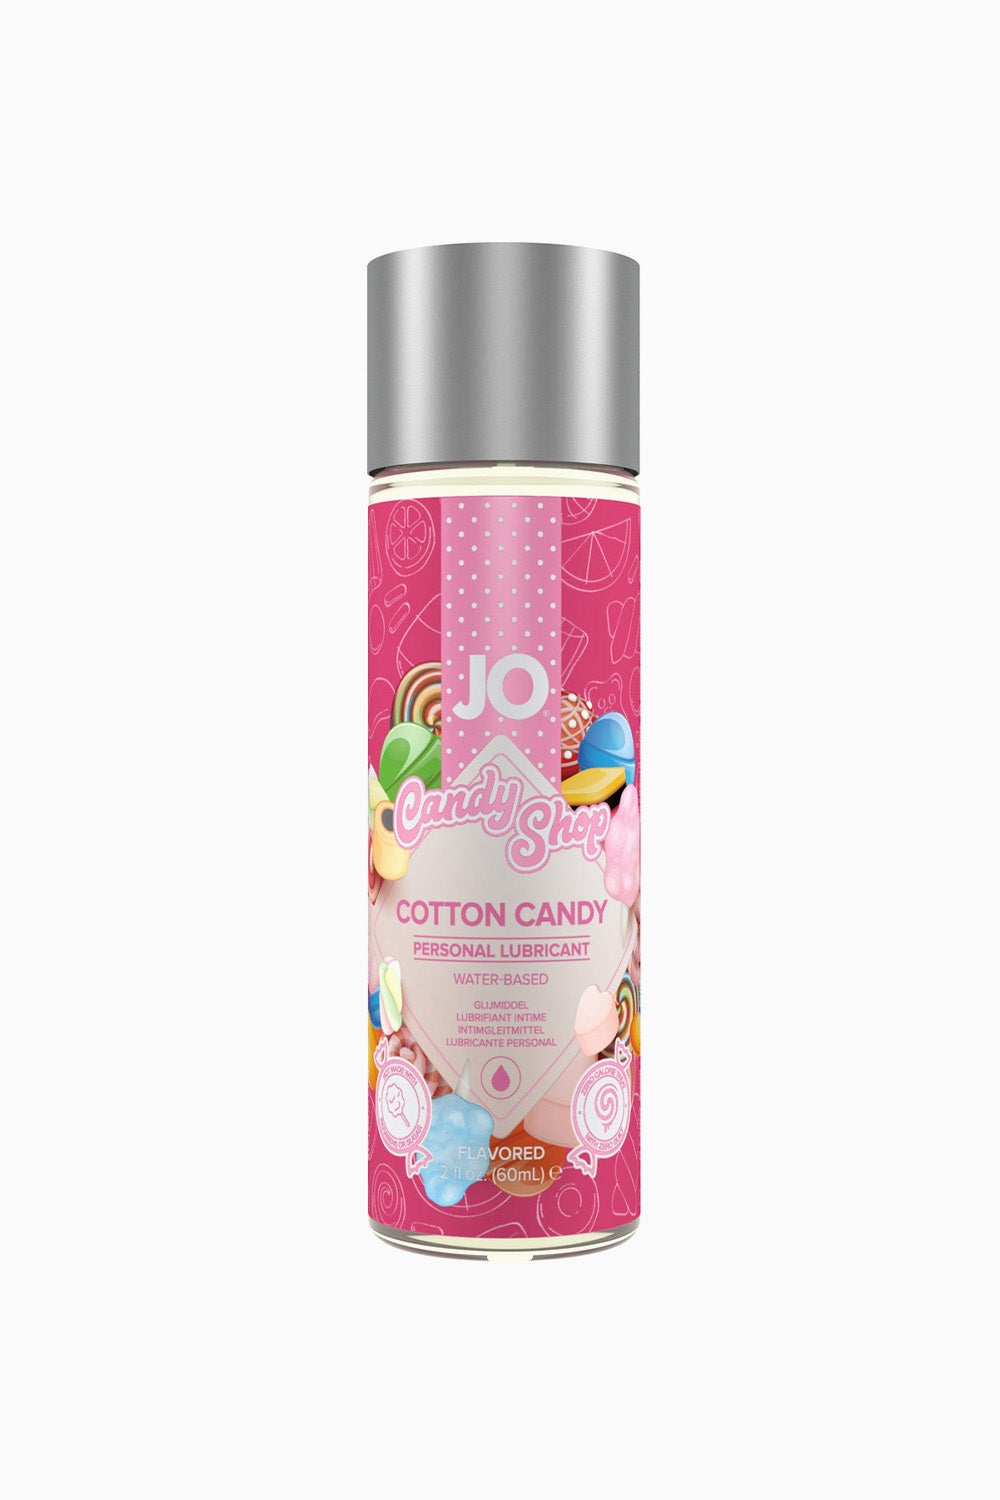 System JO Candy Shop H2O Water Based Lubricant 60 ml - Cotton Candy